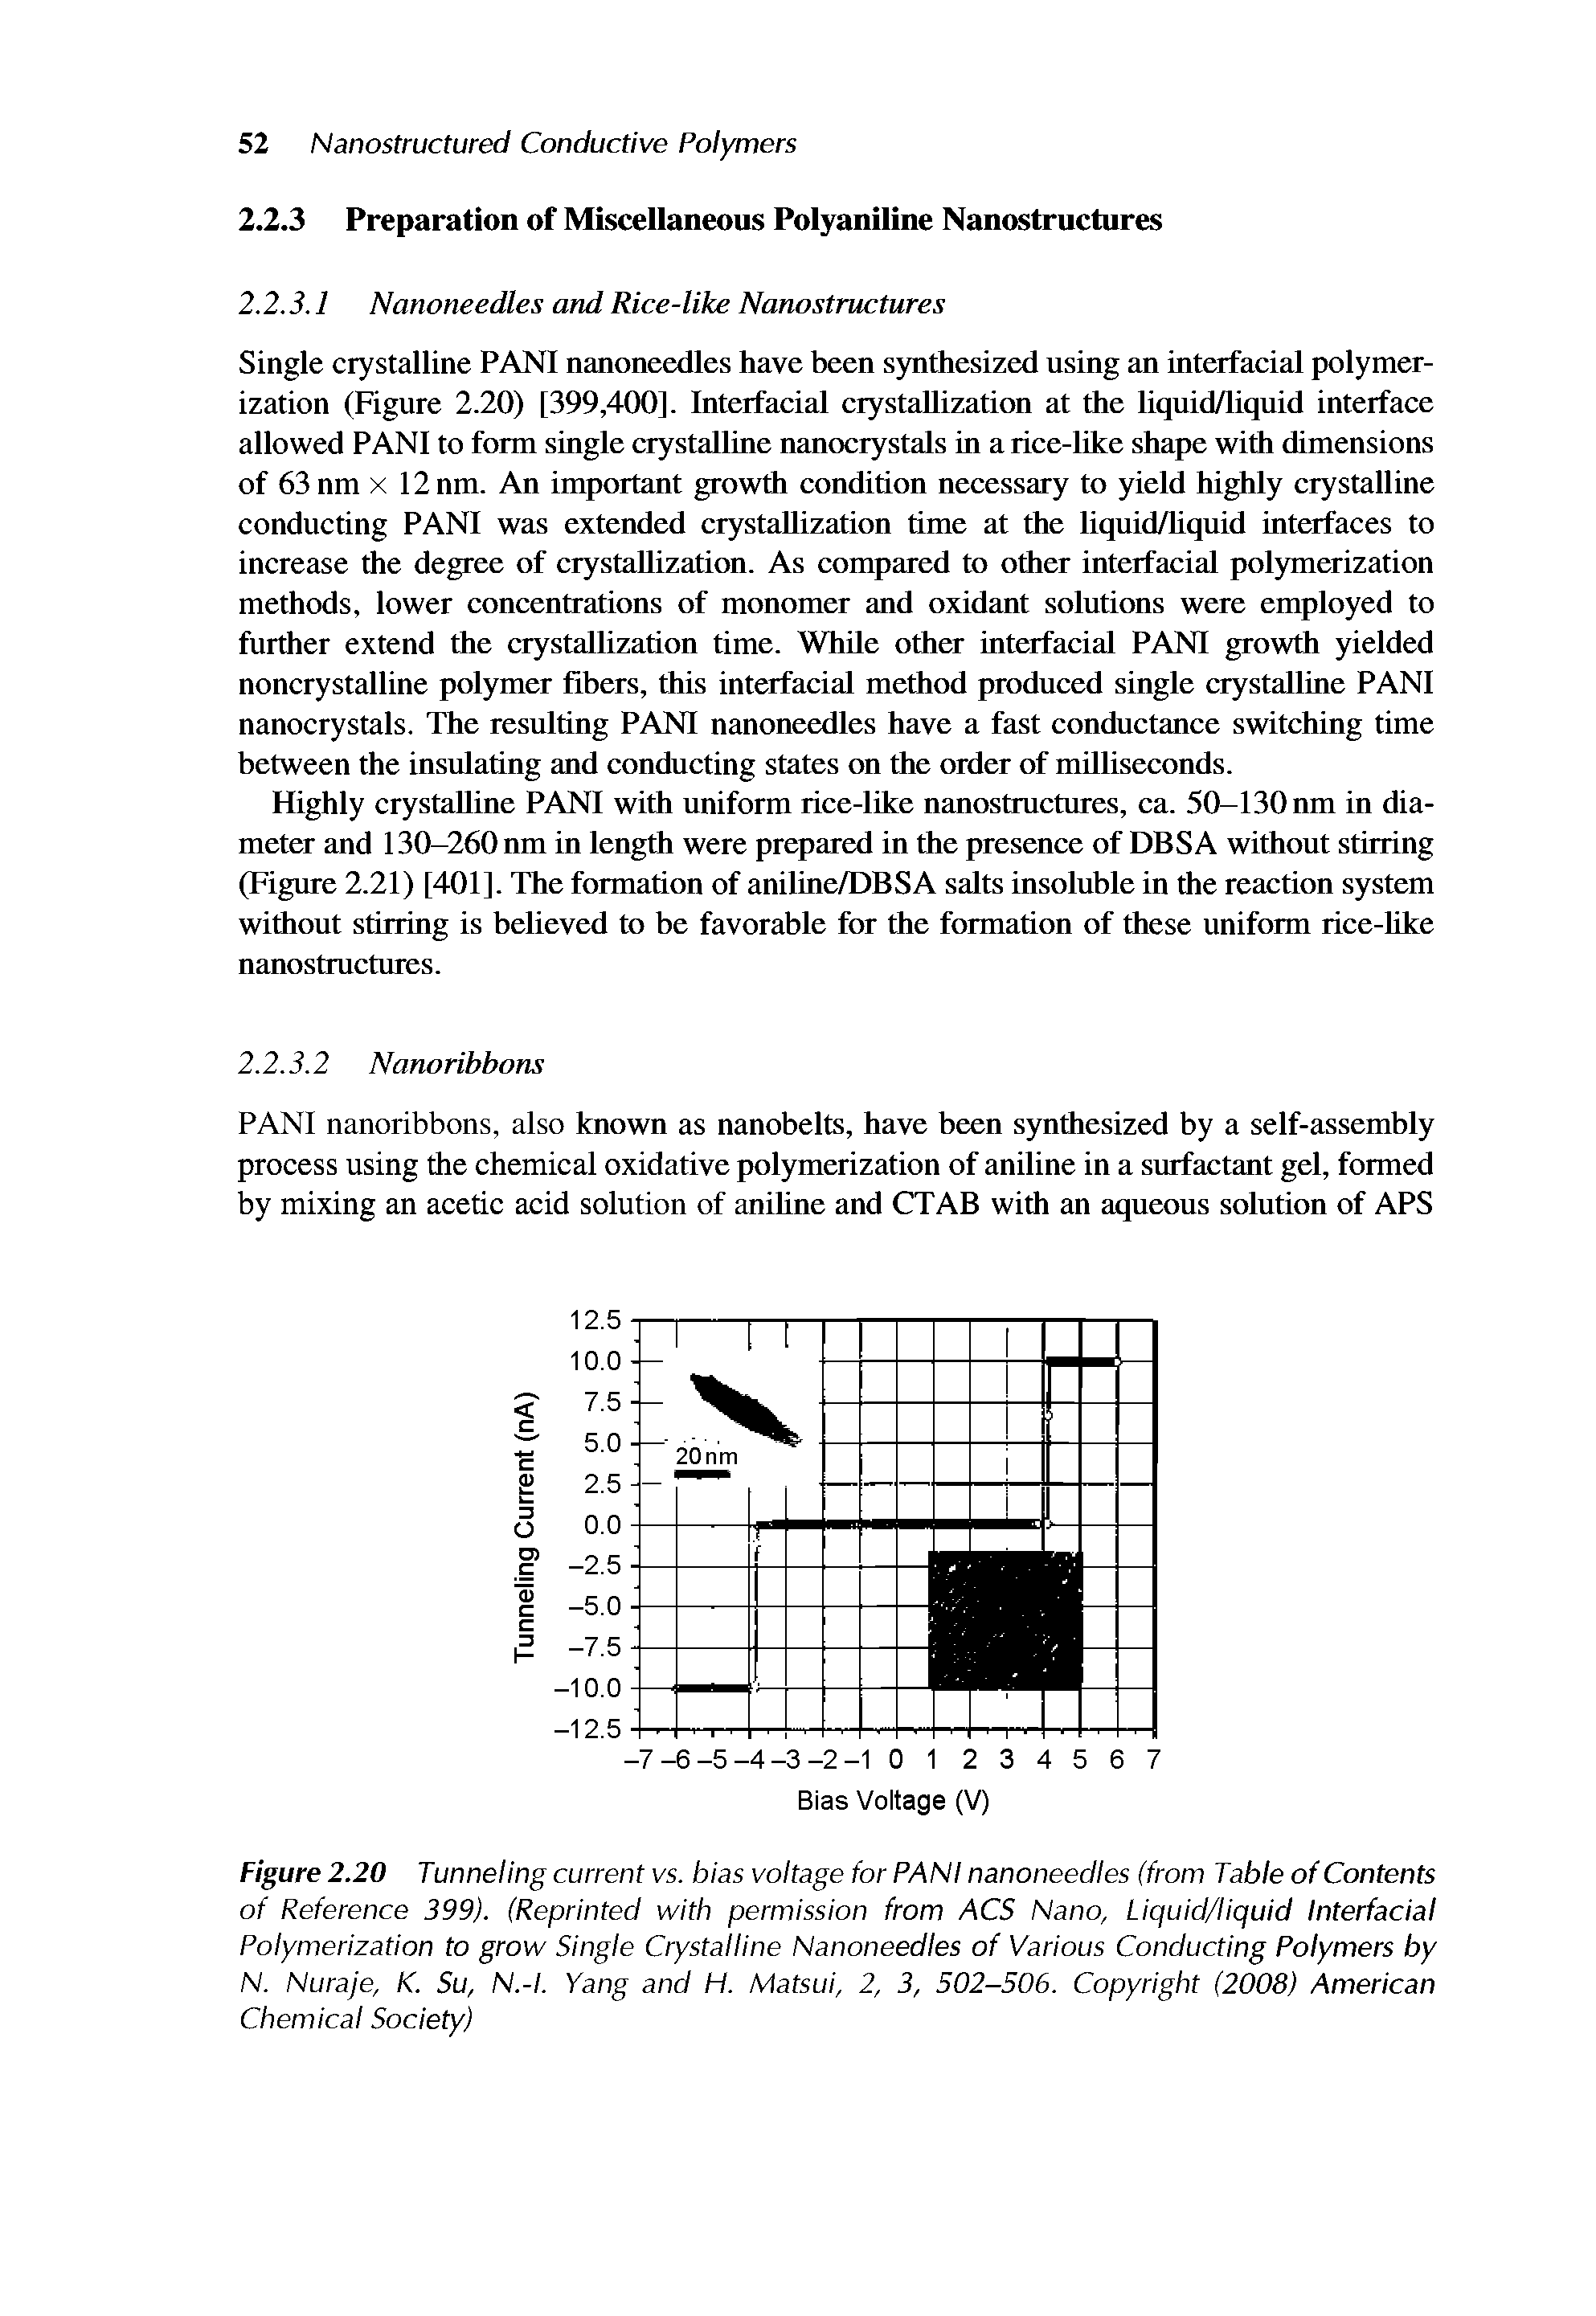 Figure 2.20 Tunneling current vs. bias voltage for PANI nanoneedles (from Table of Contents of Reference 399). (Reprinted with permission from ACS Nano, Liquid/liquid Interfacial Polymerization to grow Single Crystalline Nanoneedles of Various Conducting Polymers by N. Nuraje, K. Su, N.-l. Yang and H. Matsui, 2, 3, 502-506. Copyright (2008) American Chemical Society)...